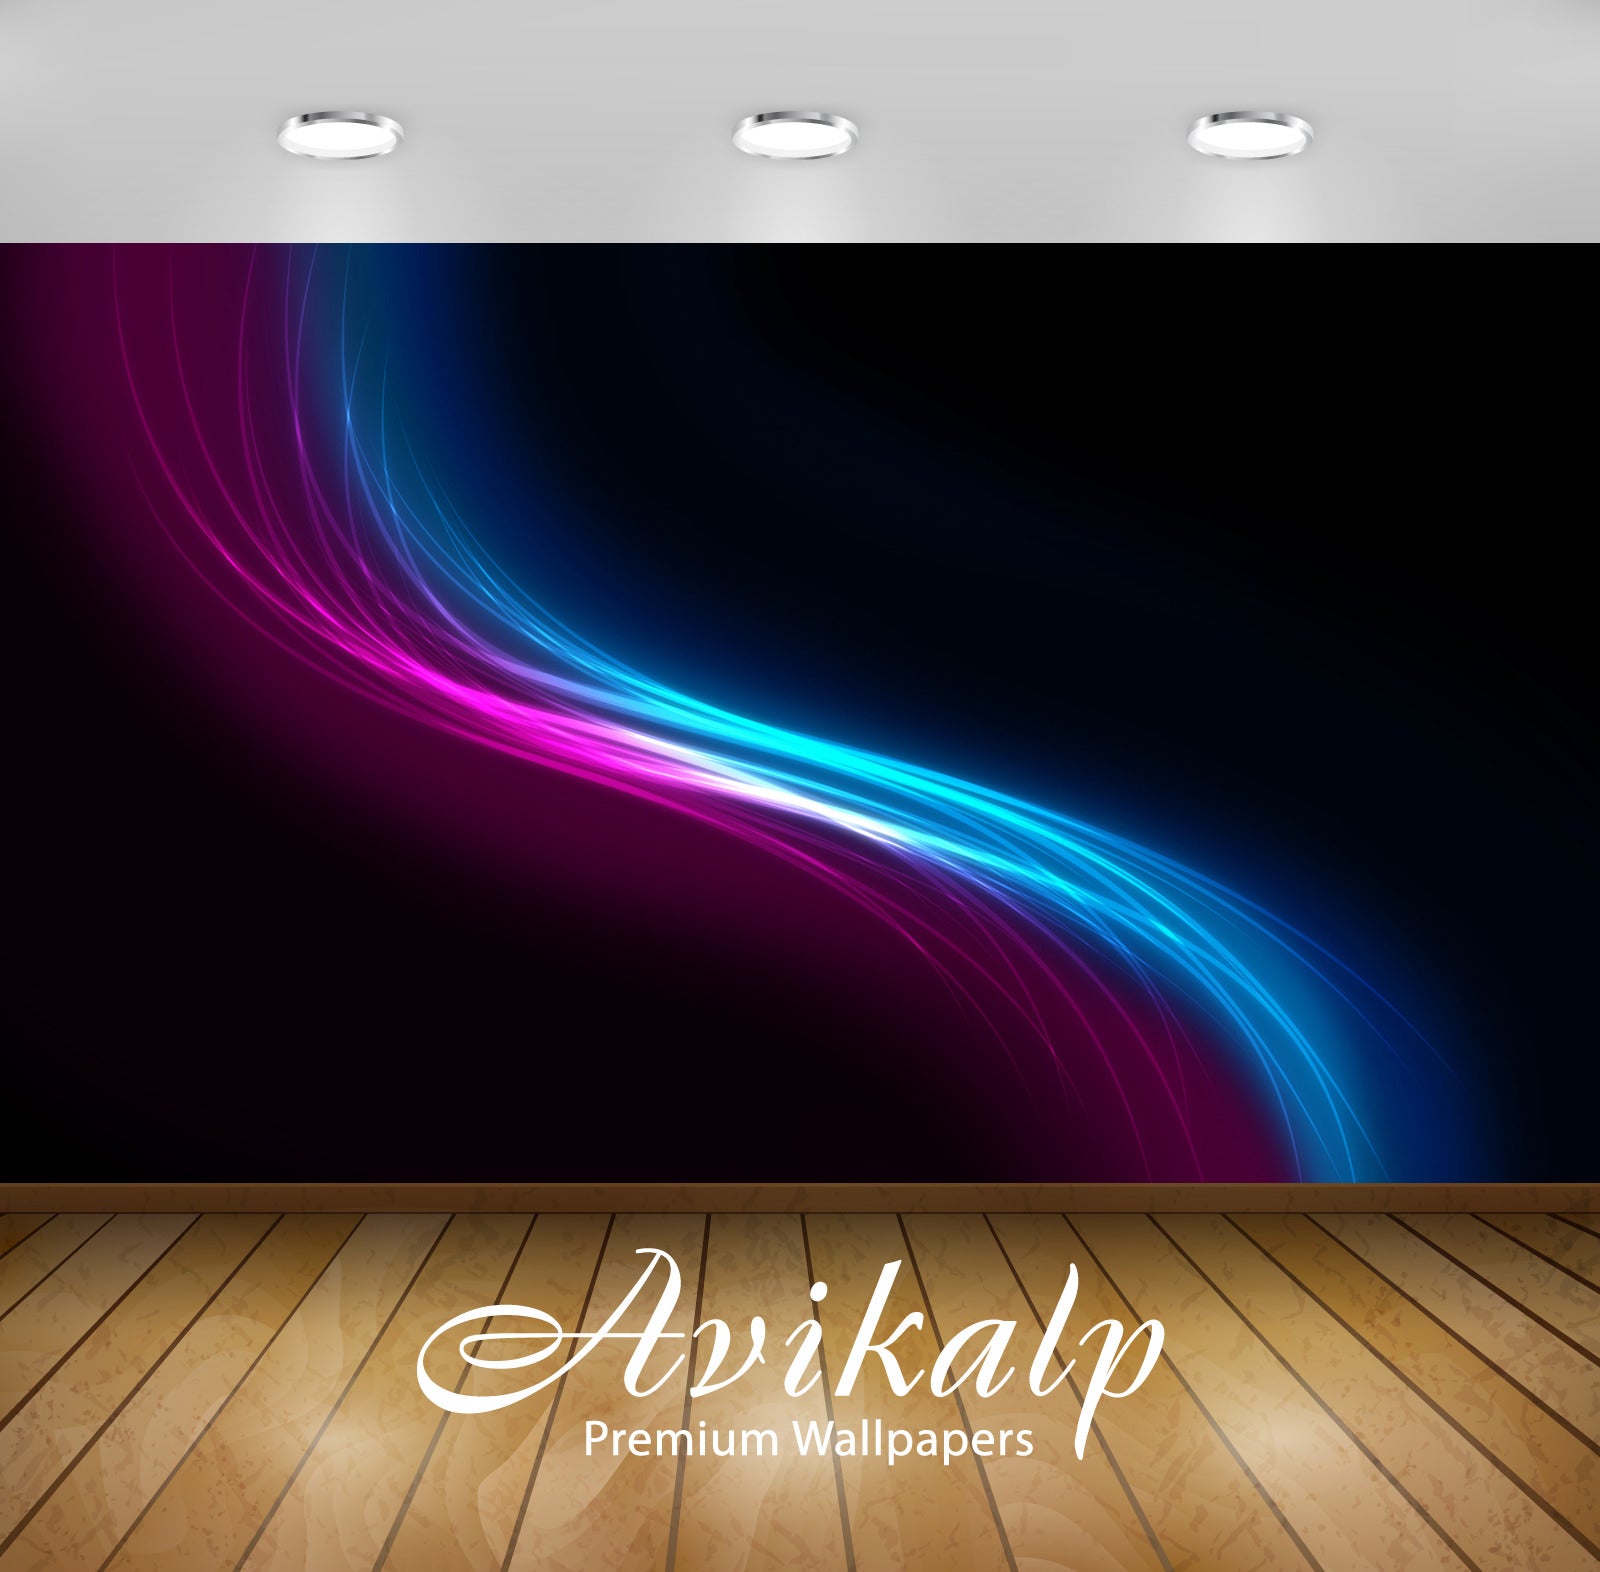 Avikalp Exclusive Awi4250 Curves Full HD Wallpapers for Living room, Hall, Kids Room, Kitchen, TV Ba